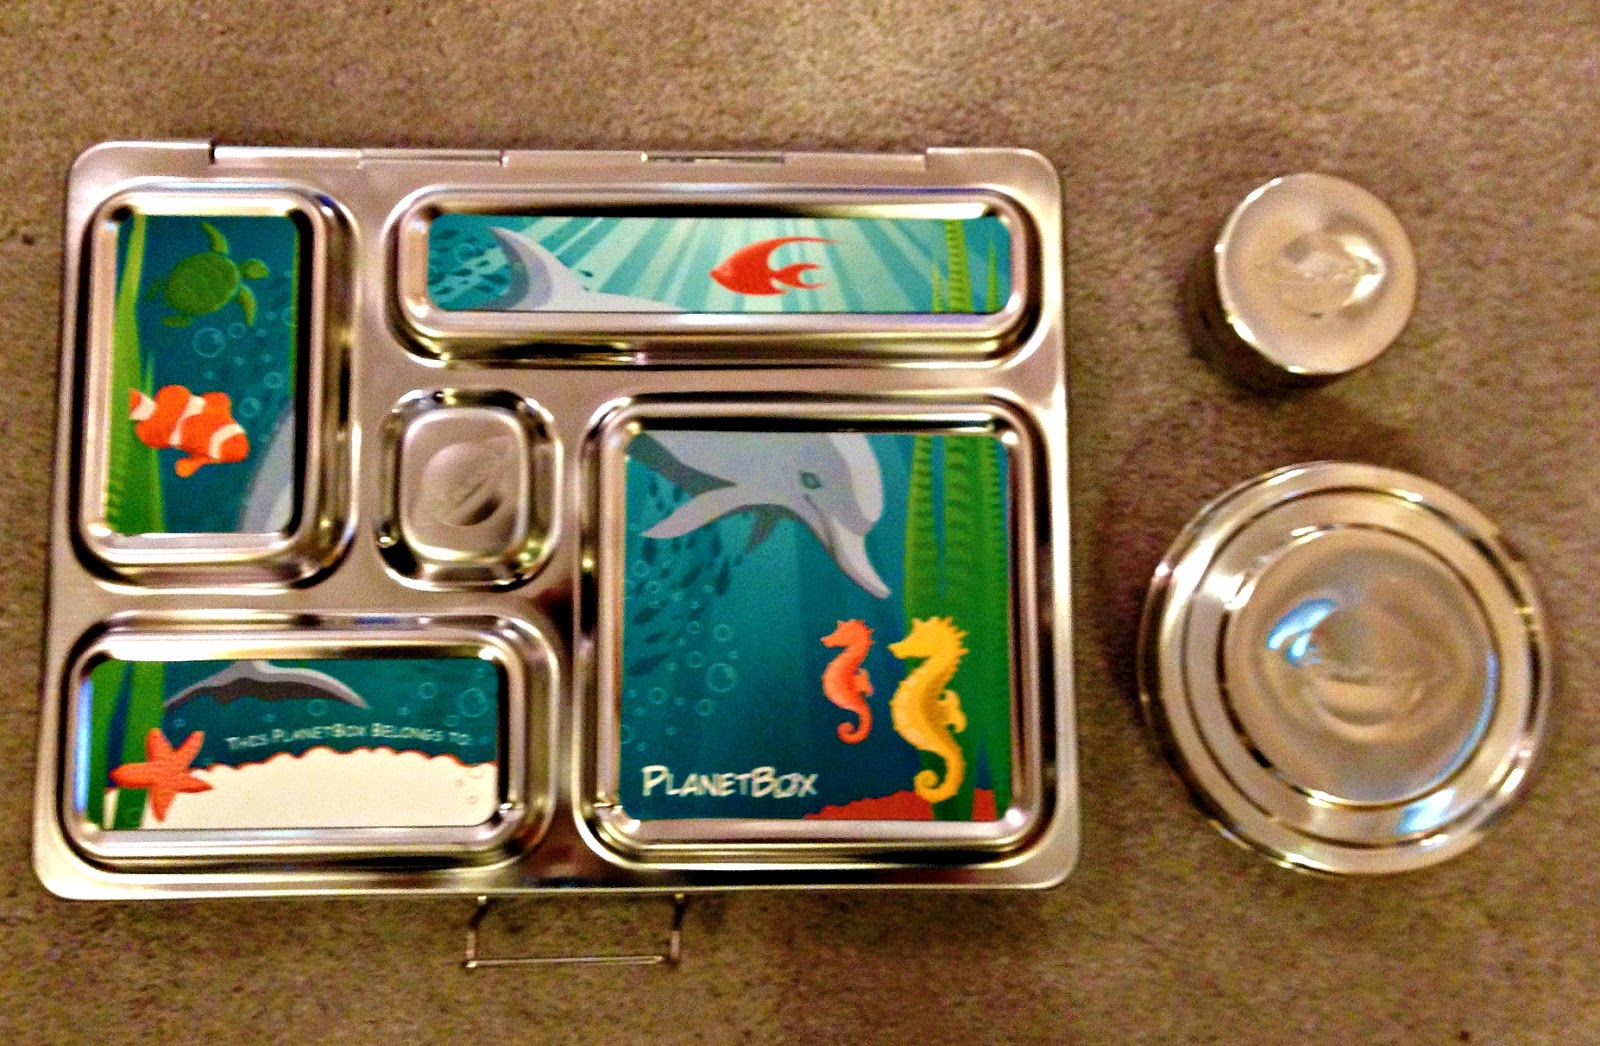 Planetbox Rover Lunchbox Review